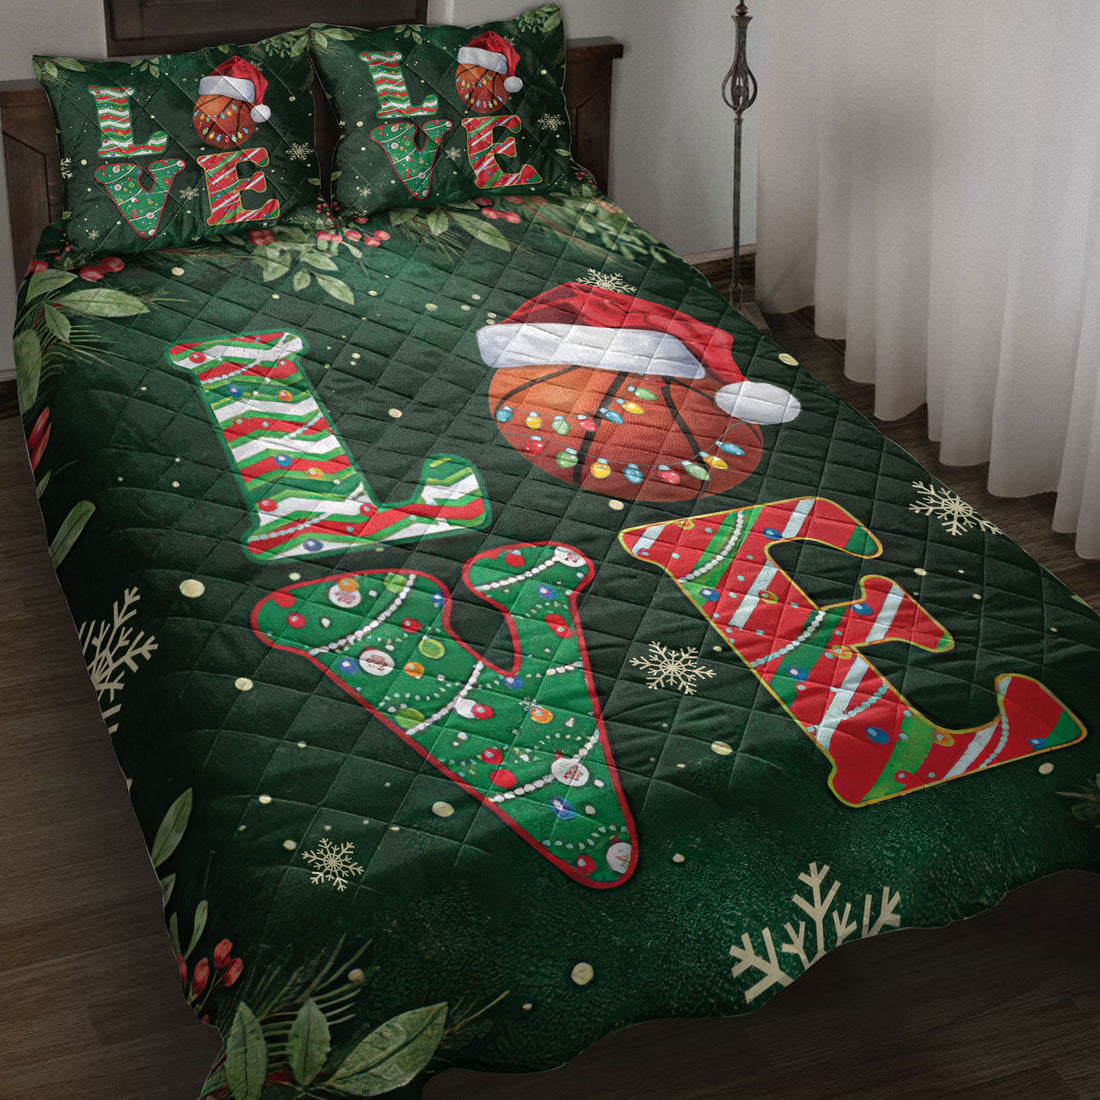 Ohaprints-Quilt-Bed-Set-Pillowcase-Love-Basketball-With-Christmas-Hat-Holly-Berry--Snowflake-Holiday-Blanket-Bedspread-Bedding-3767-Throw (55'' x 60'')